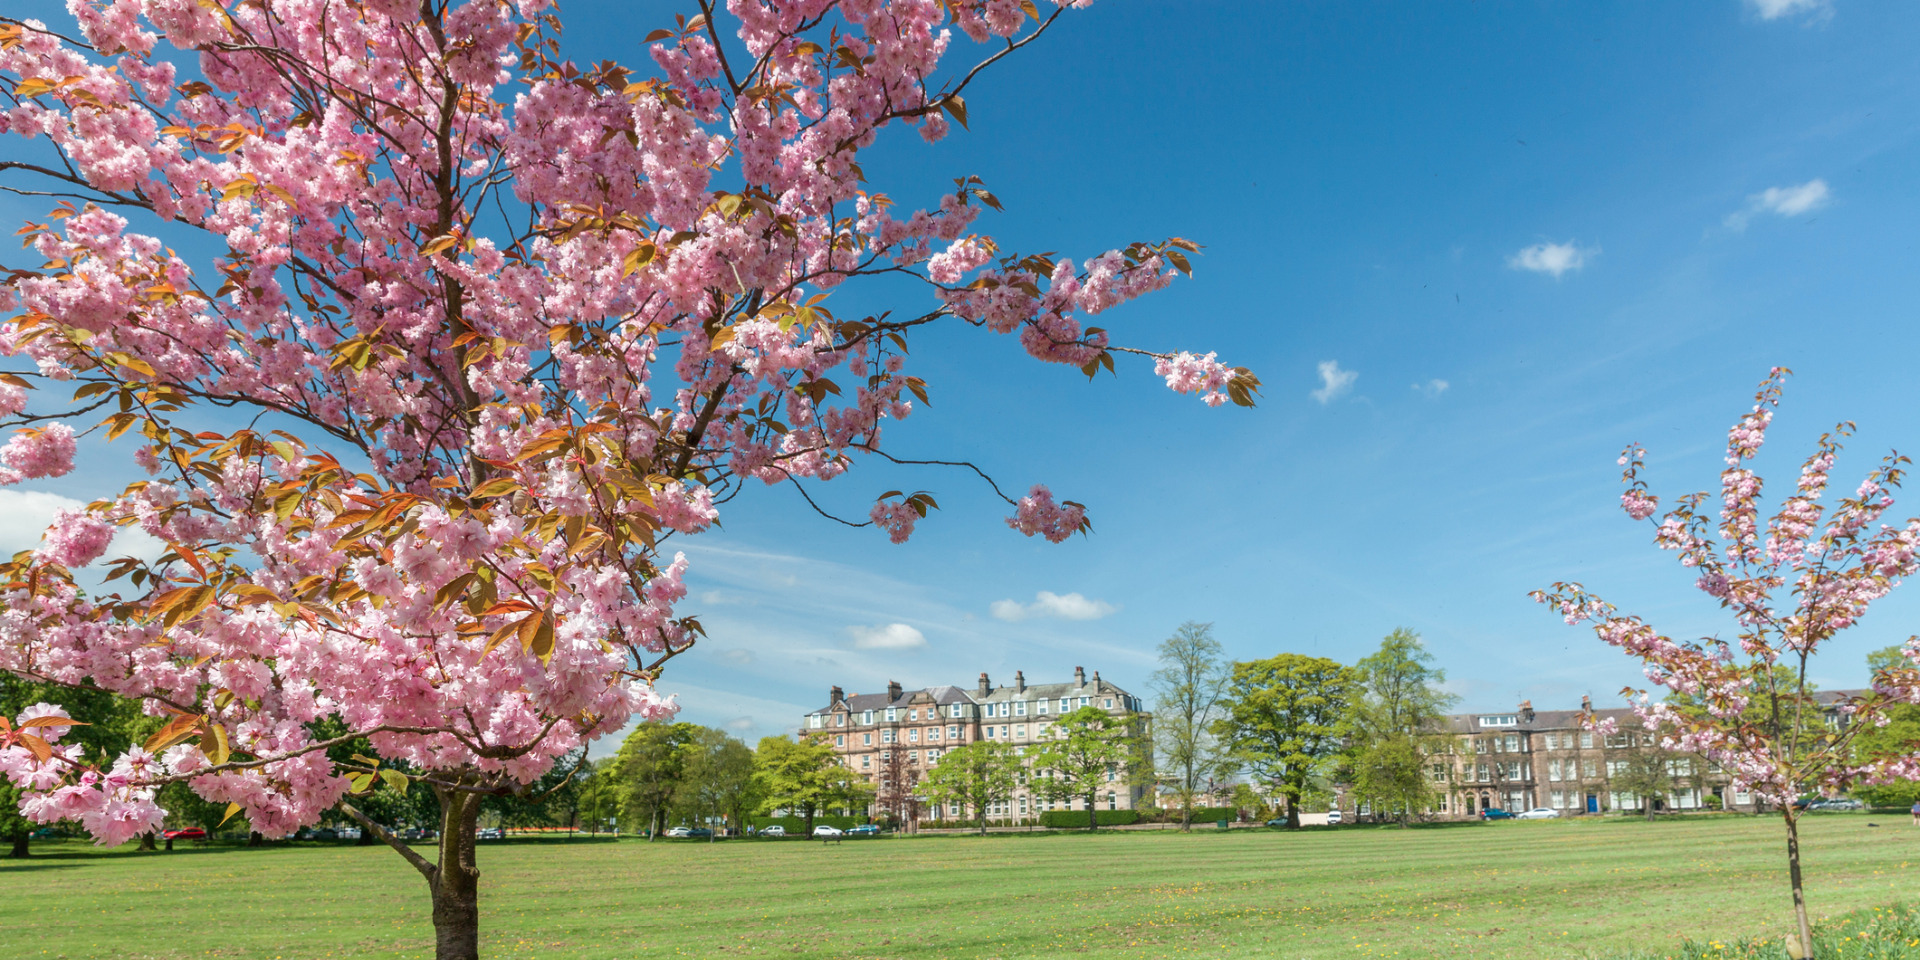 blossom tree in bloom on harrogate stray in north yorkshire